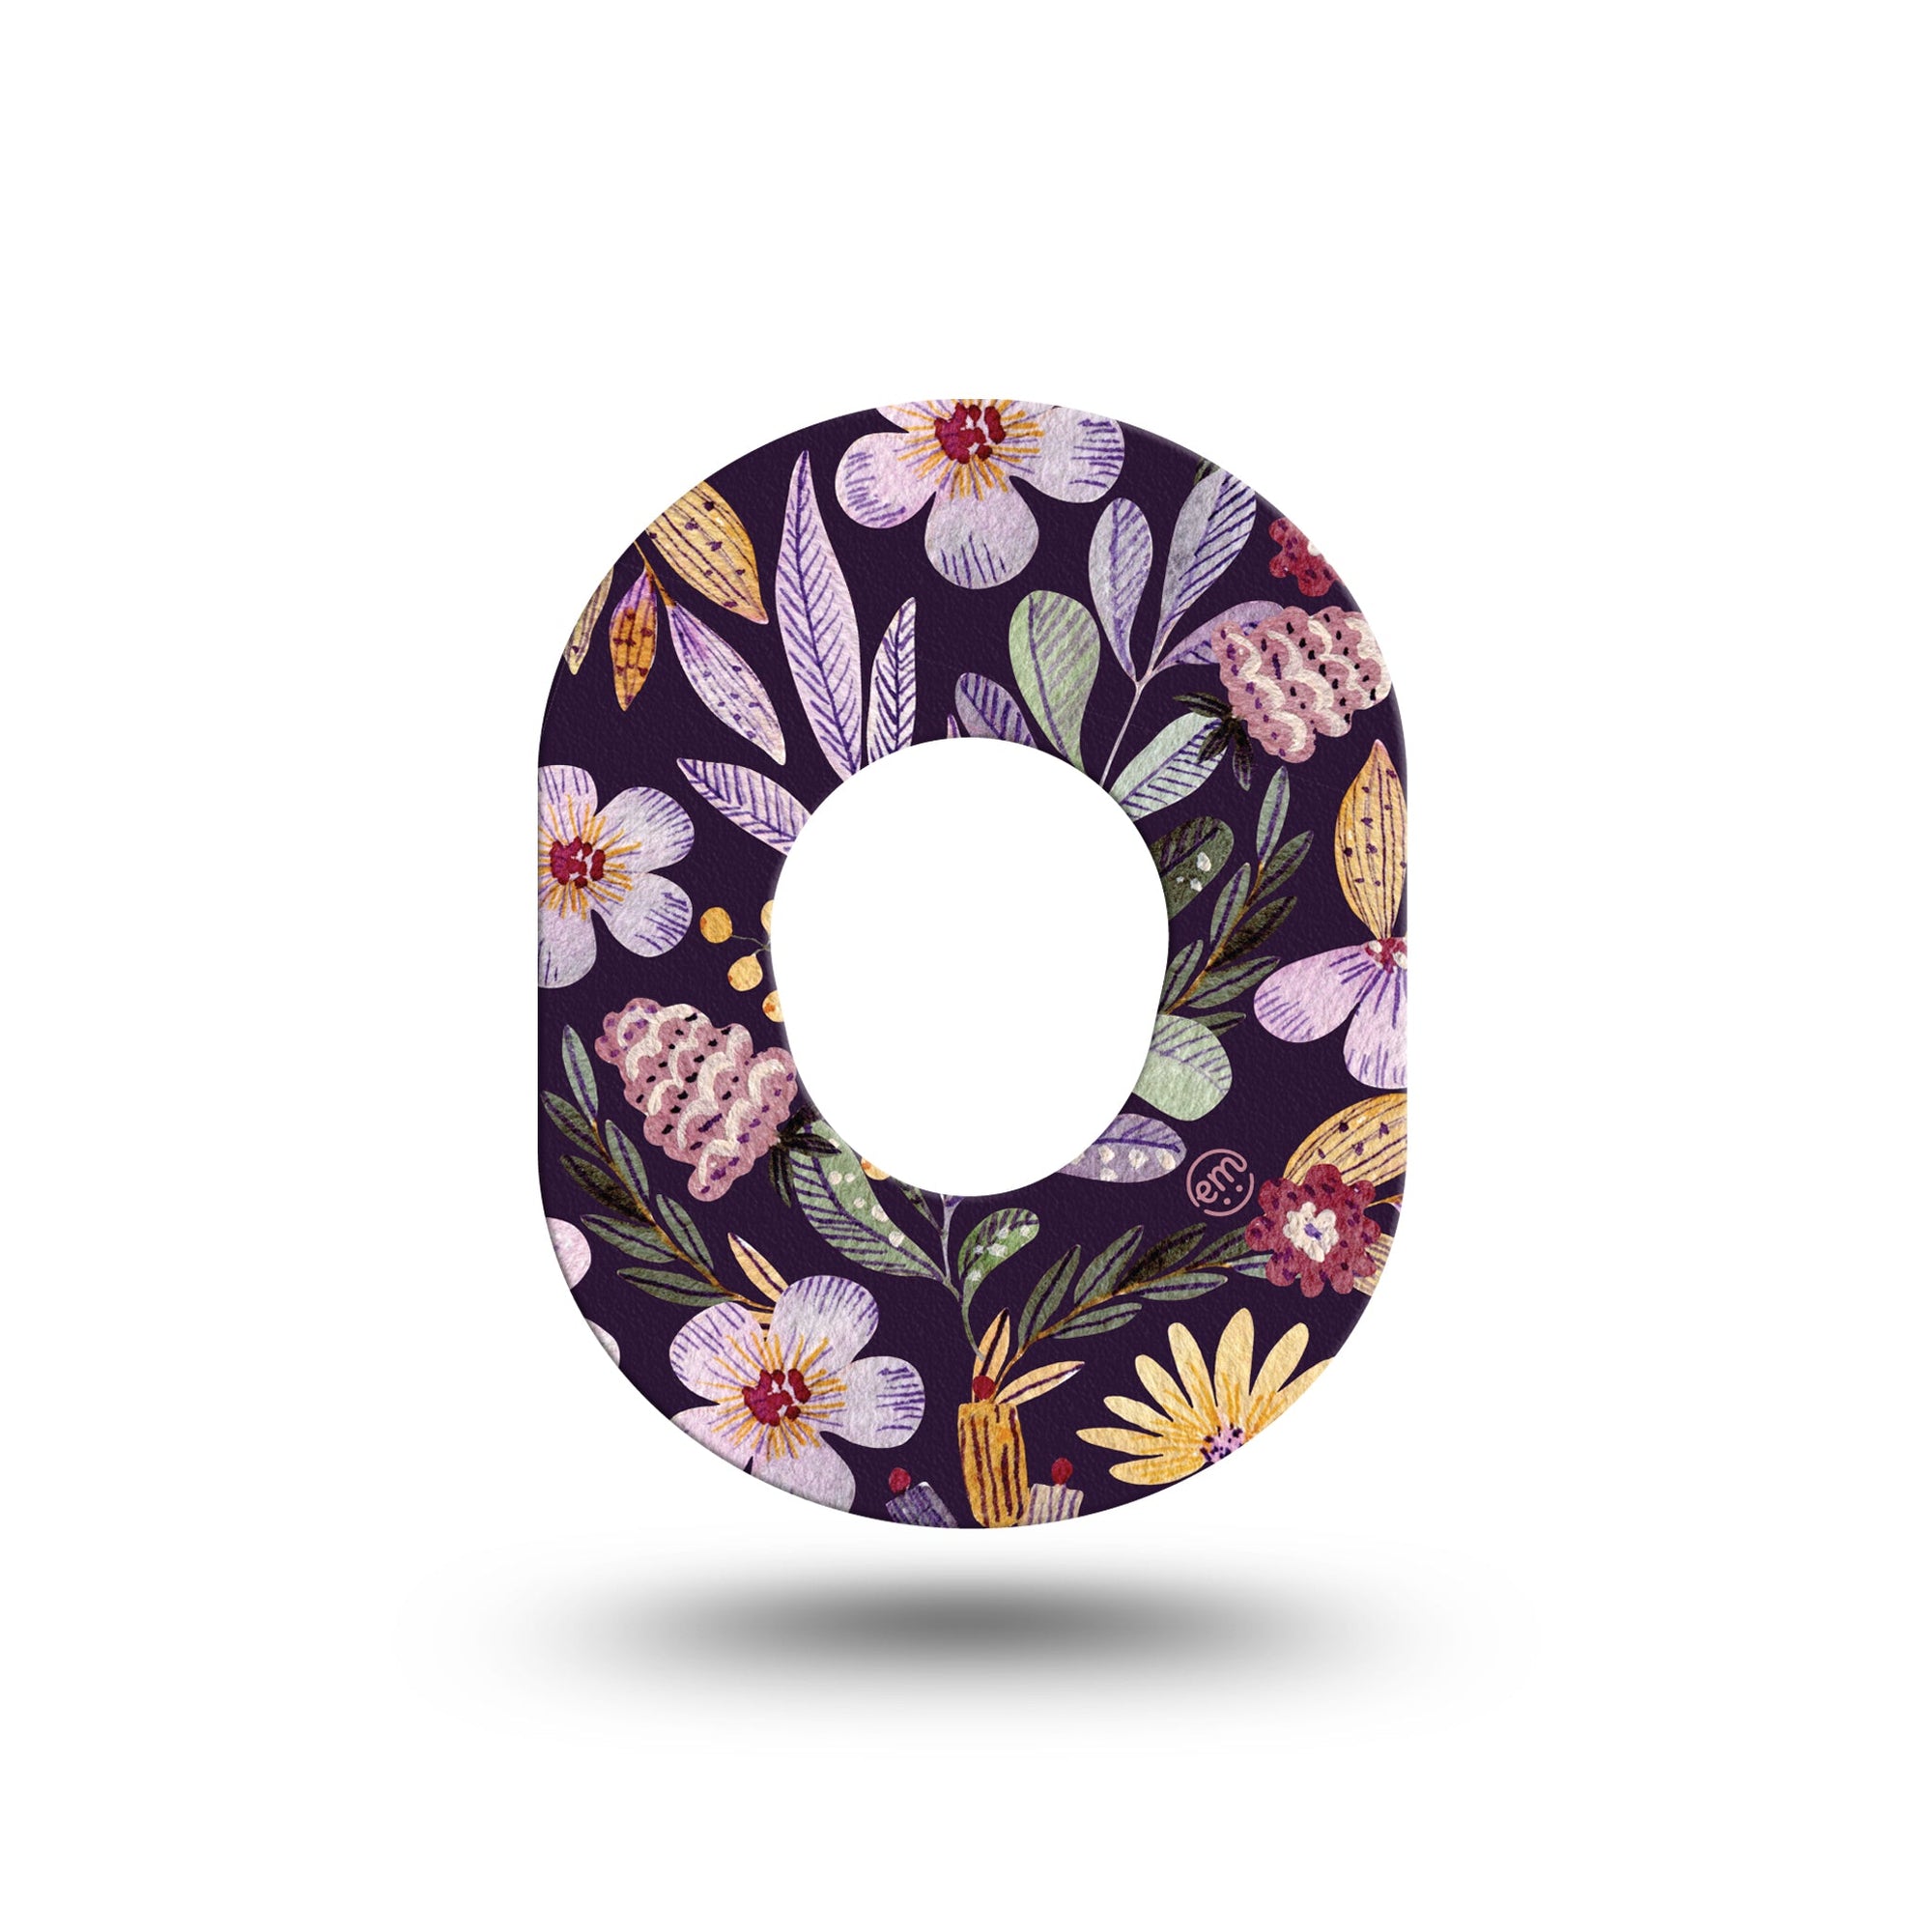 ExpressionMed Moody Blooms Dexcom G7 Mini Tape, Single, purple floral pattern 